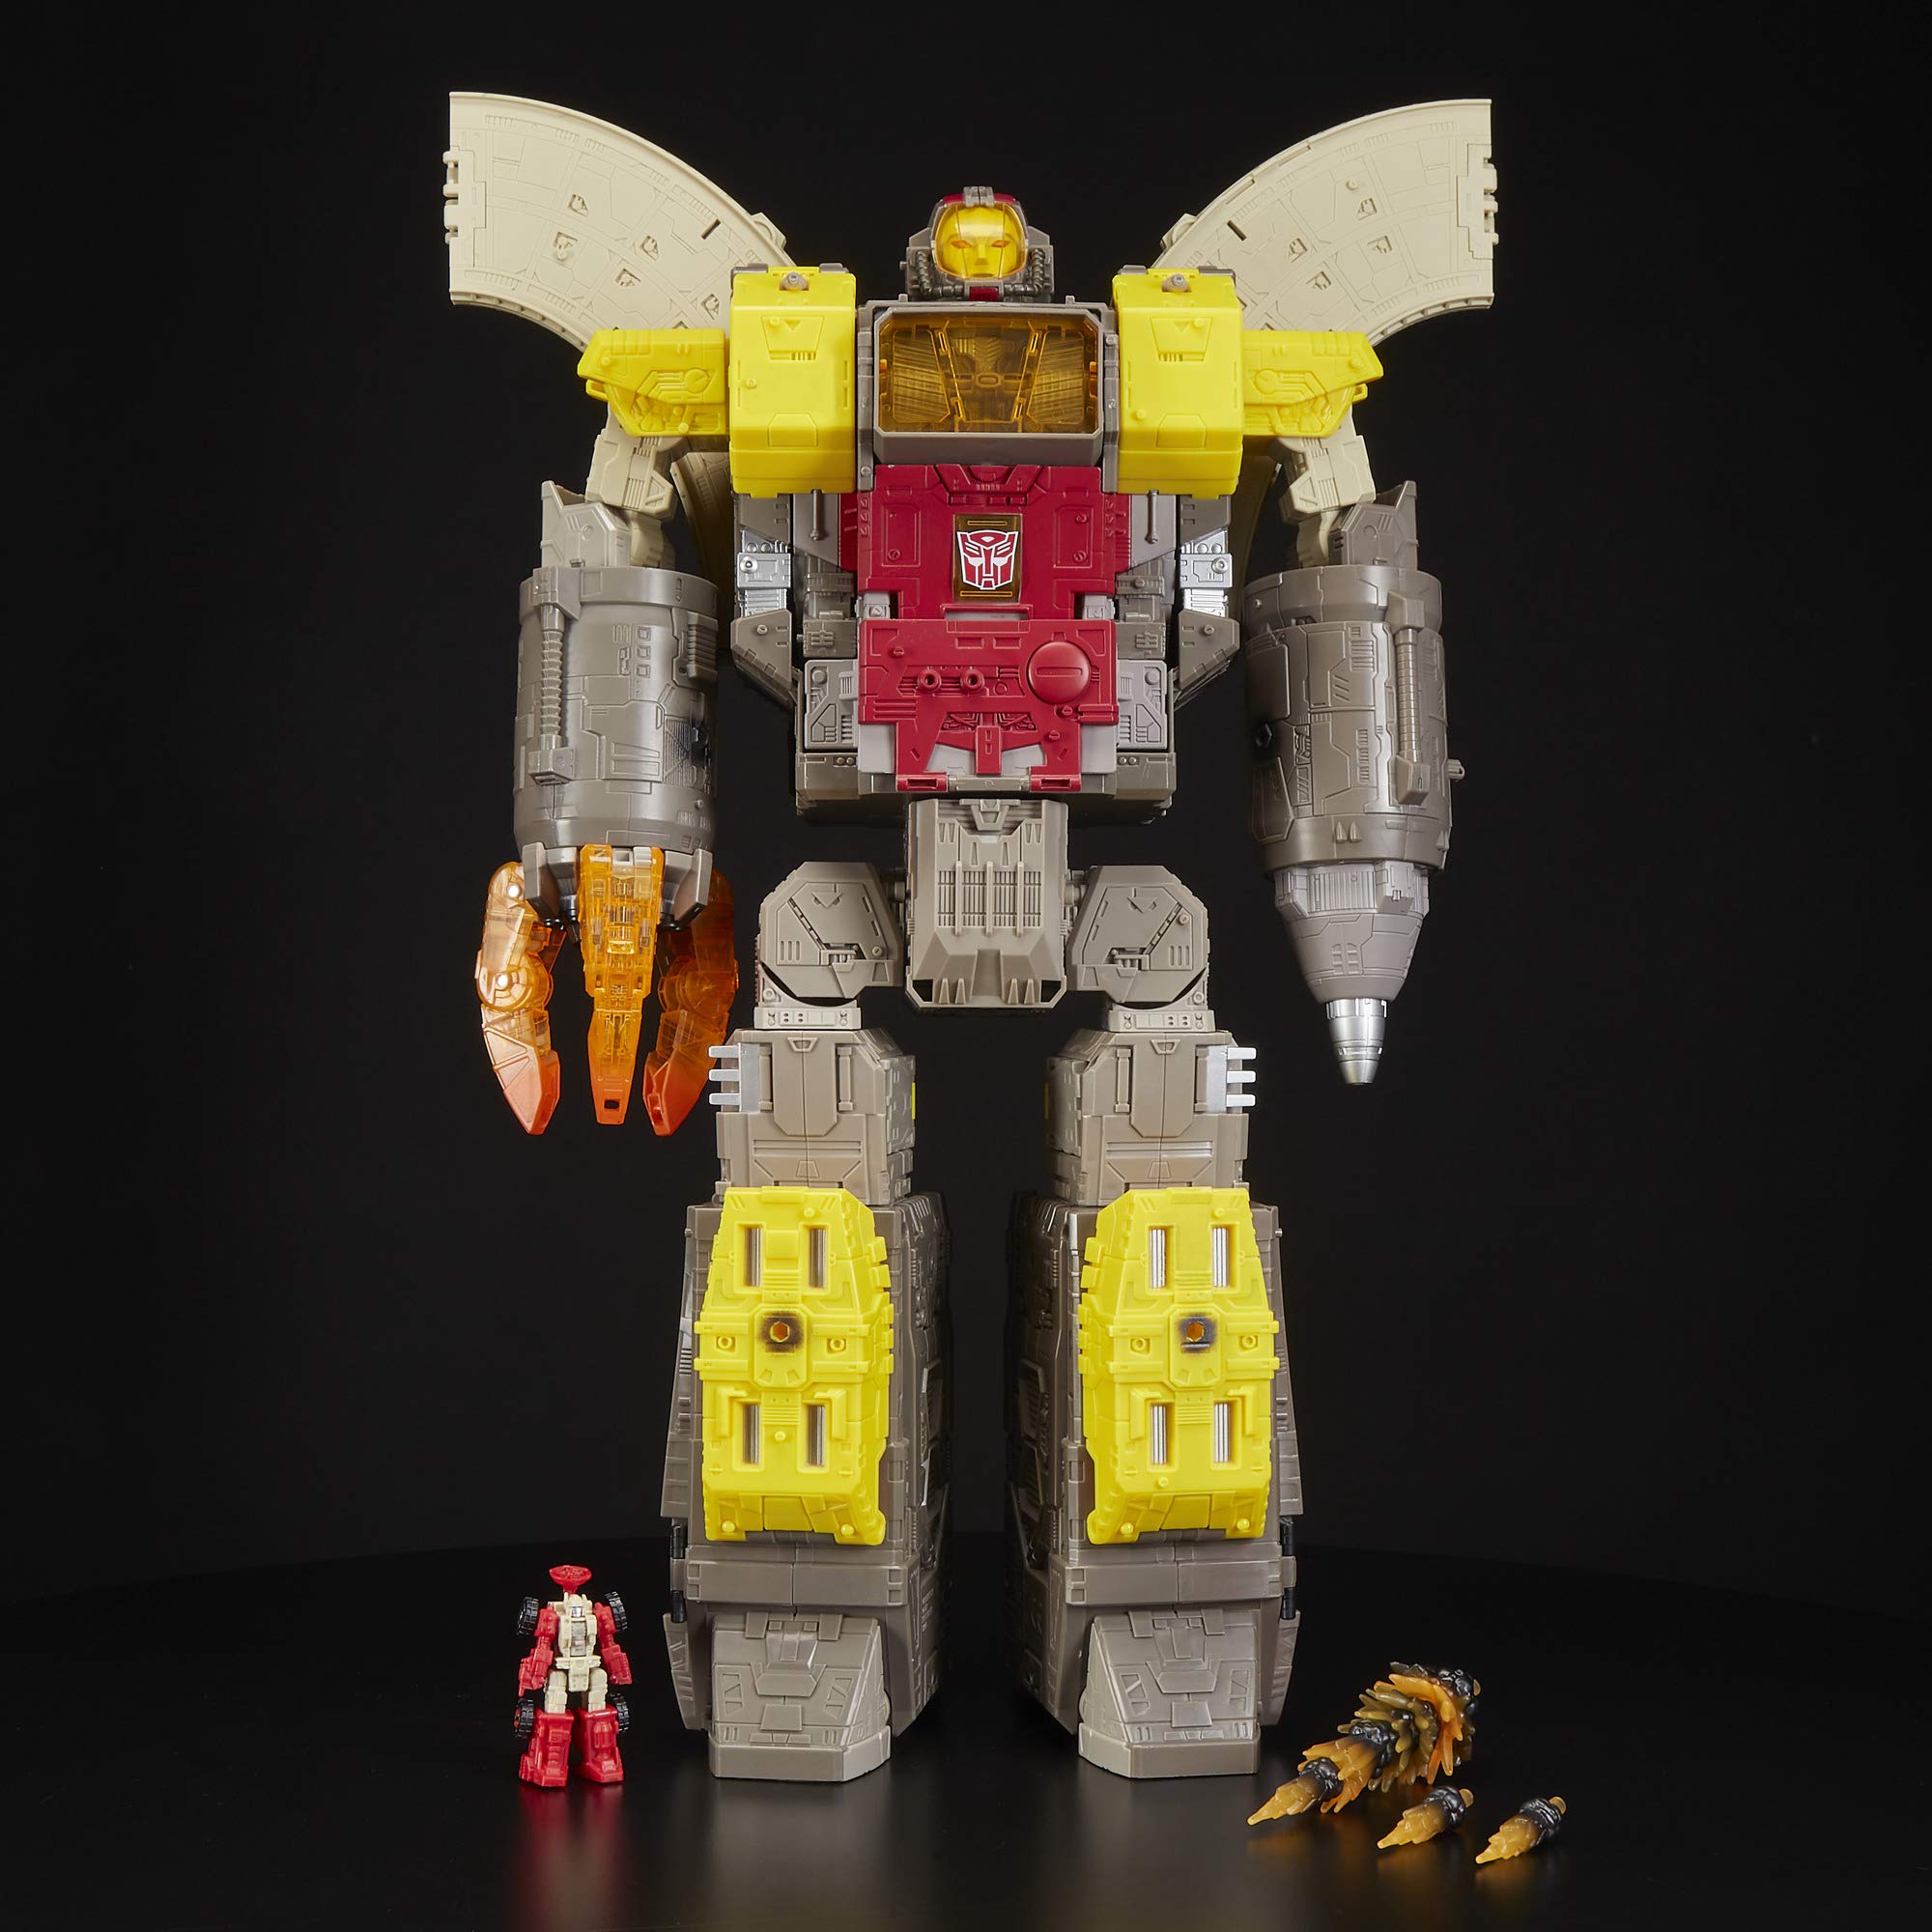 Transformers Toys Generations War for Cybertron Titan Wfc-S29 Omega Supreme Action Figure - Converts to Command Center - Adults & Kids Ages 8 & Up, 2'